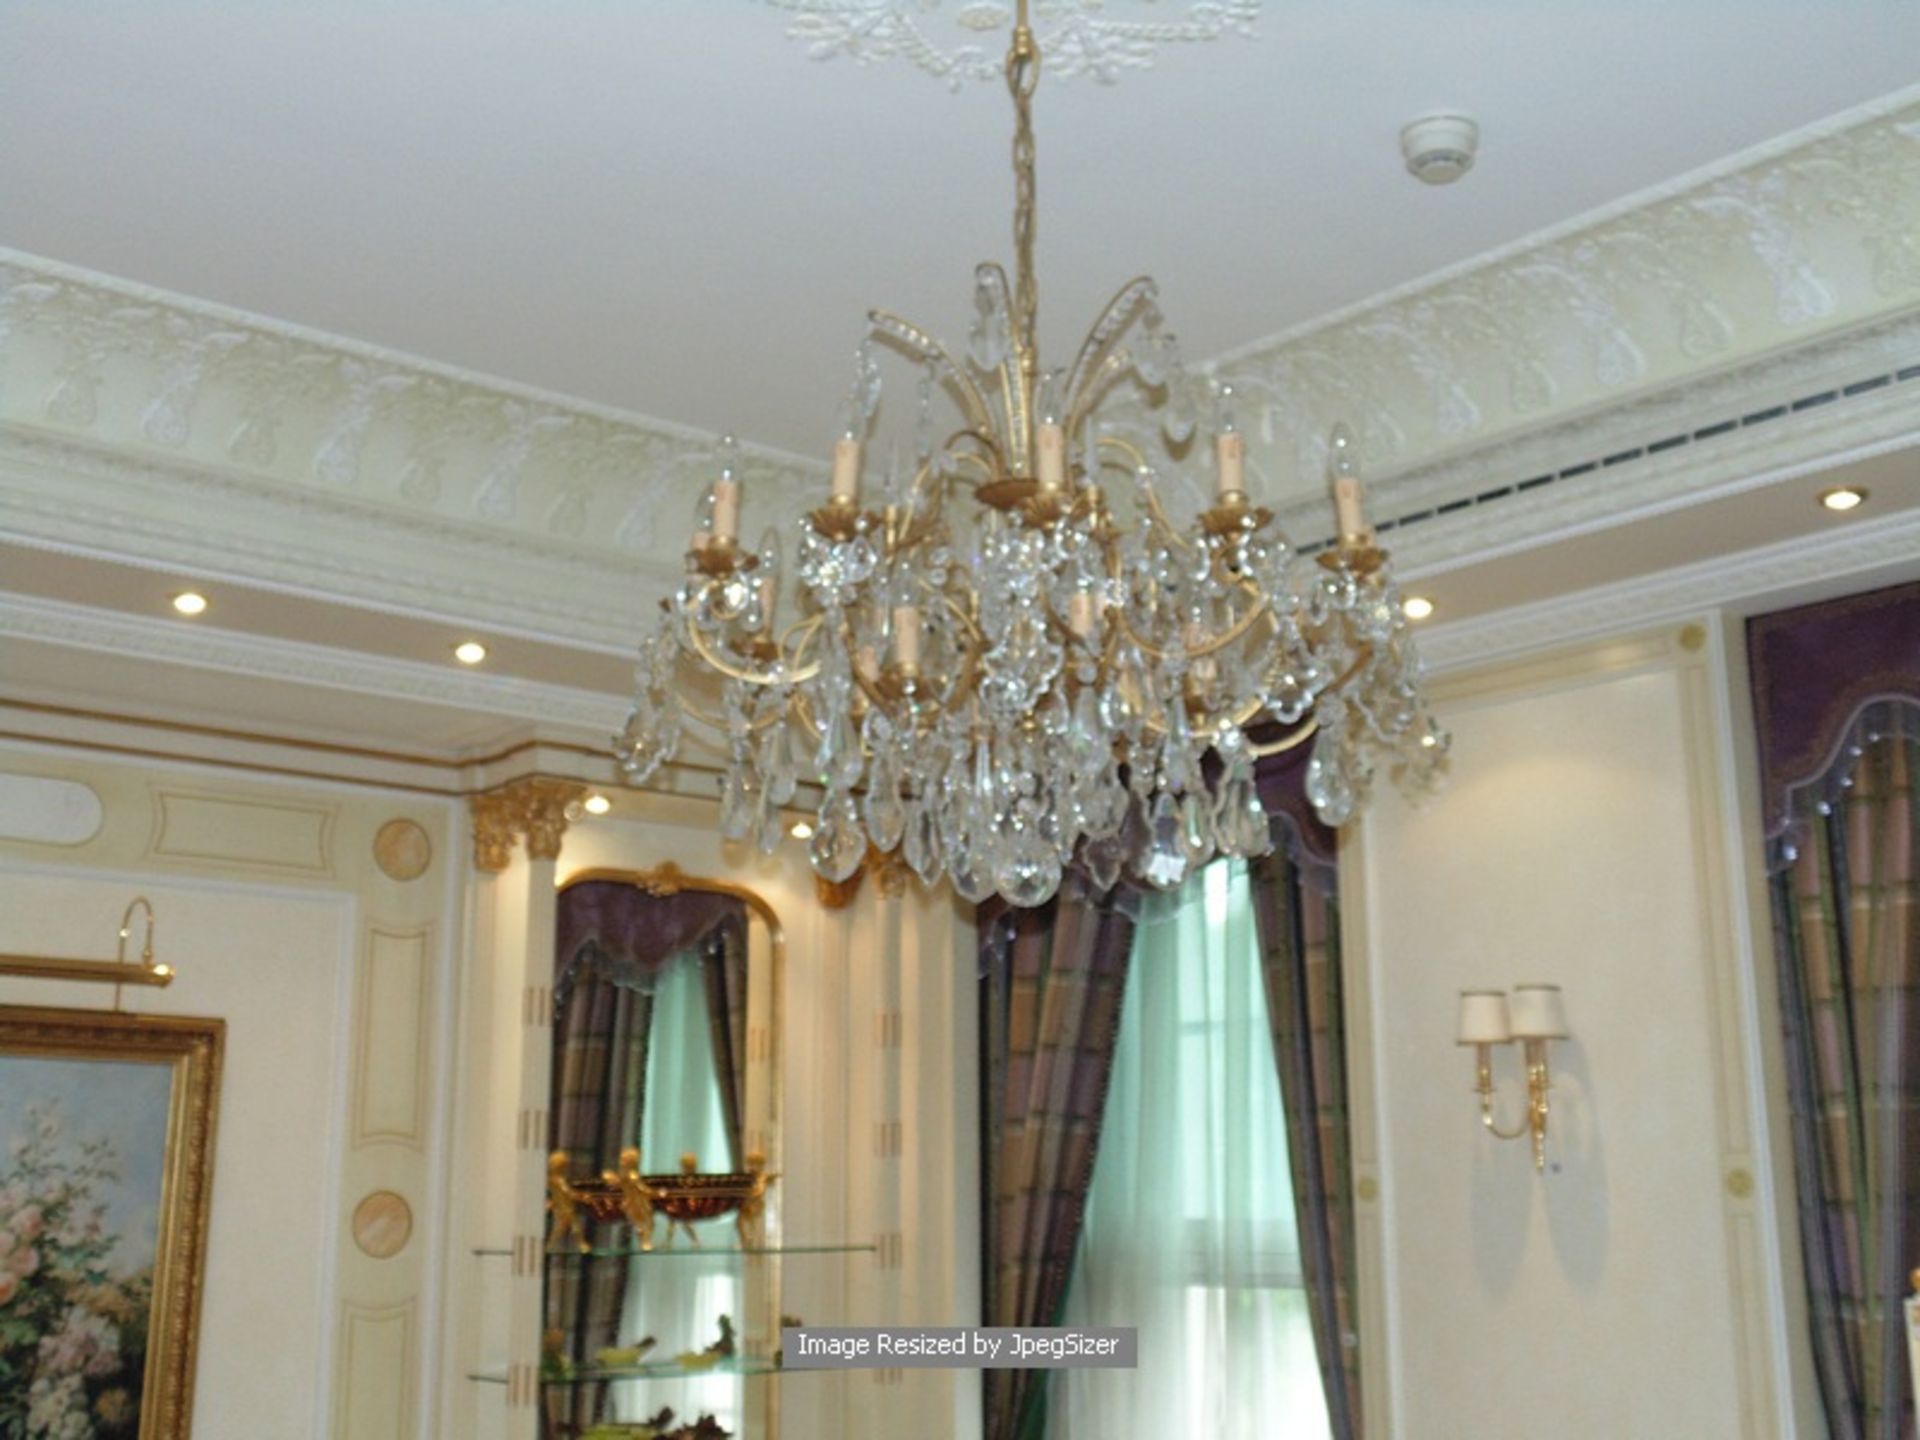 French bronze and crystal 18 arm chandelier 1250mm dropThe buyer to remove at own costs or appoint - Image 2 of 3